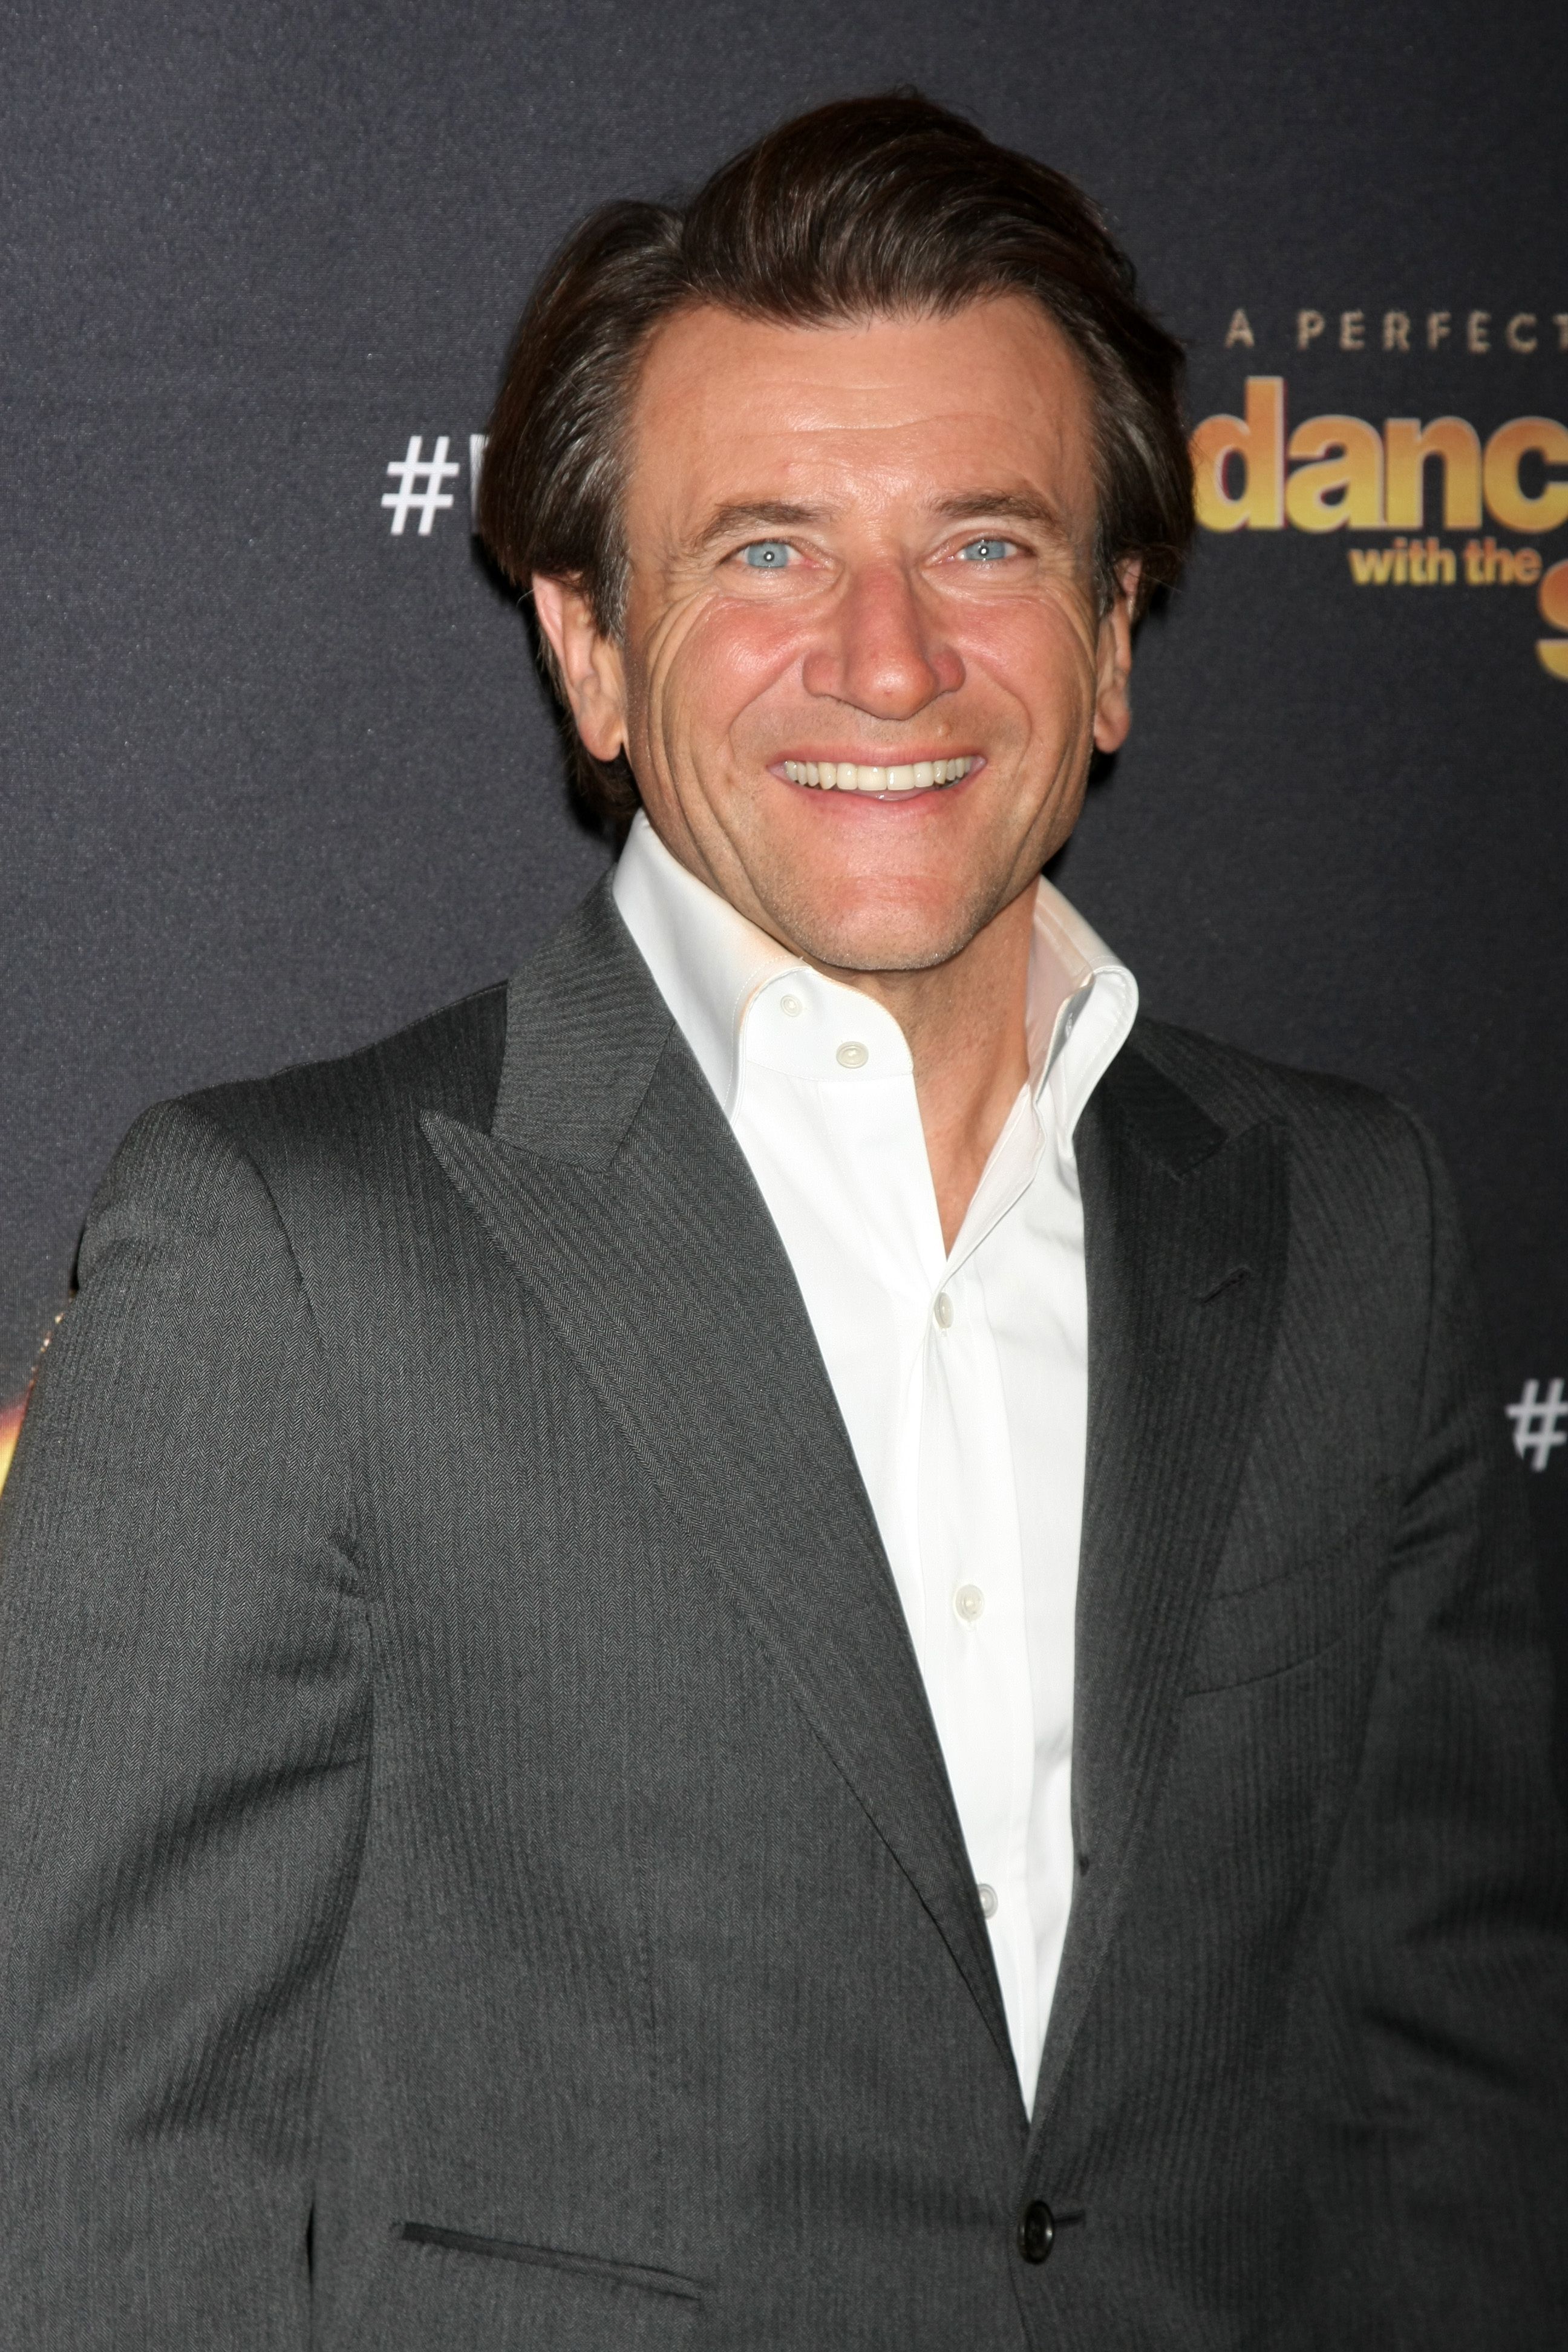 Robert Herjavec wears a gray suit and white button-up.